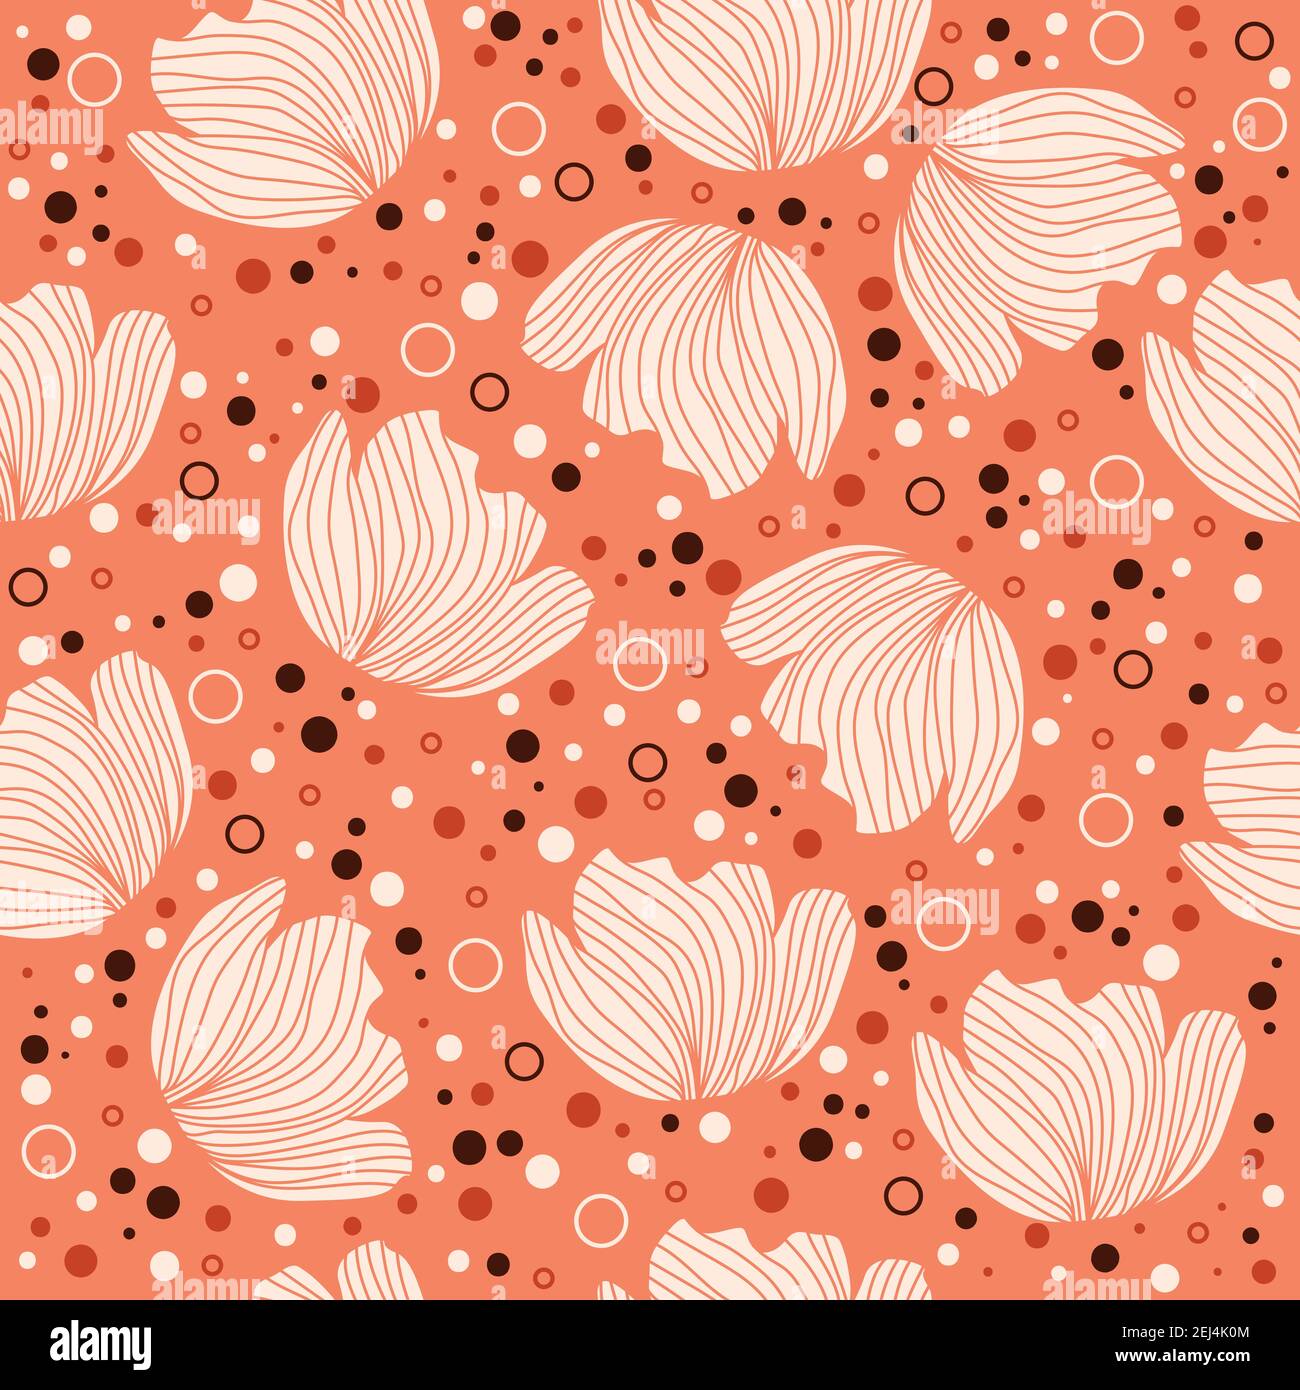 Floral pattern design with flower silhouettes, dots and small circles on a orange background Stock Vector